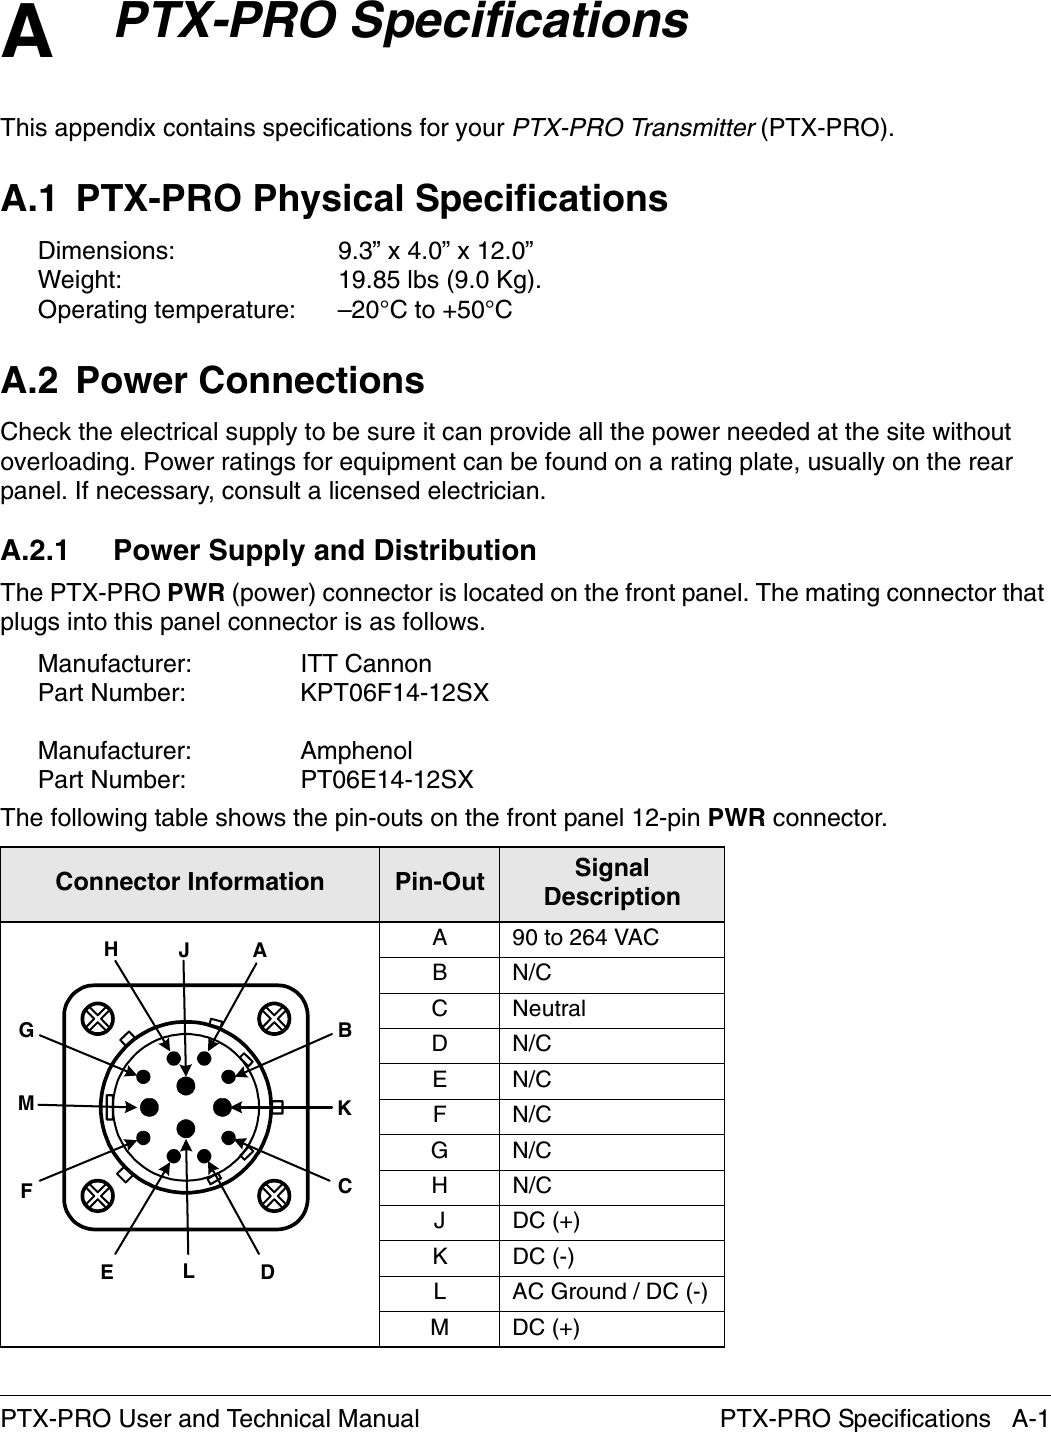 A PTX-PRO Specifications   A-1PTX-PRO User and Technical ManualPTX-PRO SpecificationsThis appendix contains specifications for your PTX-PRO Transmitter (PTX-PRO).A.1 PTX-PRO Physical SpecificationsDimensions:  9.3” x 4.0” x 12.0”Weight:  19.85 lbs (9.0 Kg). Operating temperature:  –20°C to +50°CA.2 Power ConnectionsCheck the electrical supply to be sure it can provide all the power needed at the site without overloading. Power ratings for equipment can be found on a rating plate, usually on the rear panel. If necessary, consult a licensed electrician.A.2.1 Power Supply and DistributionThe PTX-PRO PWR (power) connector is located on the front panel. The mating connector that plugs into this panel connector is as follows.Manufacturer: ITT CannonPart Number: KPT06F14-12SXManufacturer: AmphenolPart Number: PT06E14-12SX The following table shows the pin-outs on the front panel 12-pin PWR connector.Connector Information  Pin-Out Signal DescriptionA 90 to 264 VACBN/CC NeutralDN/CEN/CFN/CGN/CHN/CJ DC (+)K DC (-)L AC Ground / DC (-)M DC (+)ABCDEFGHJKLM